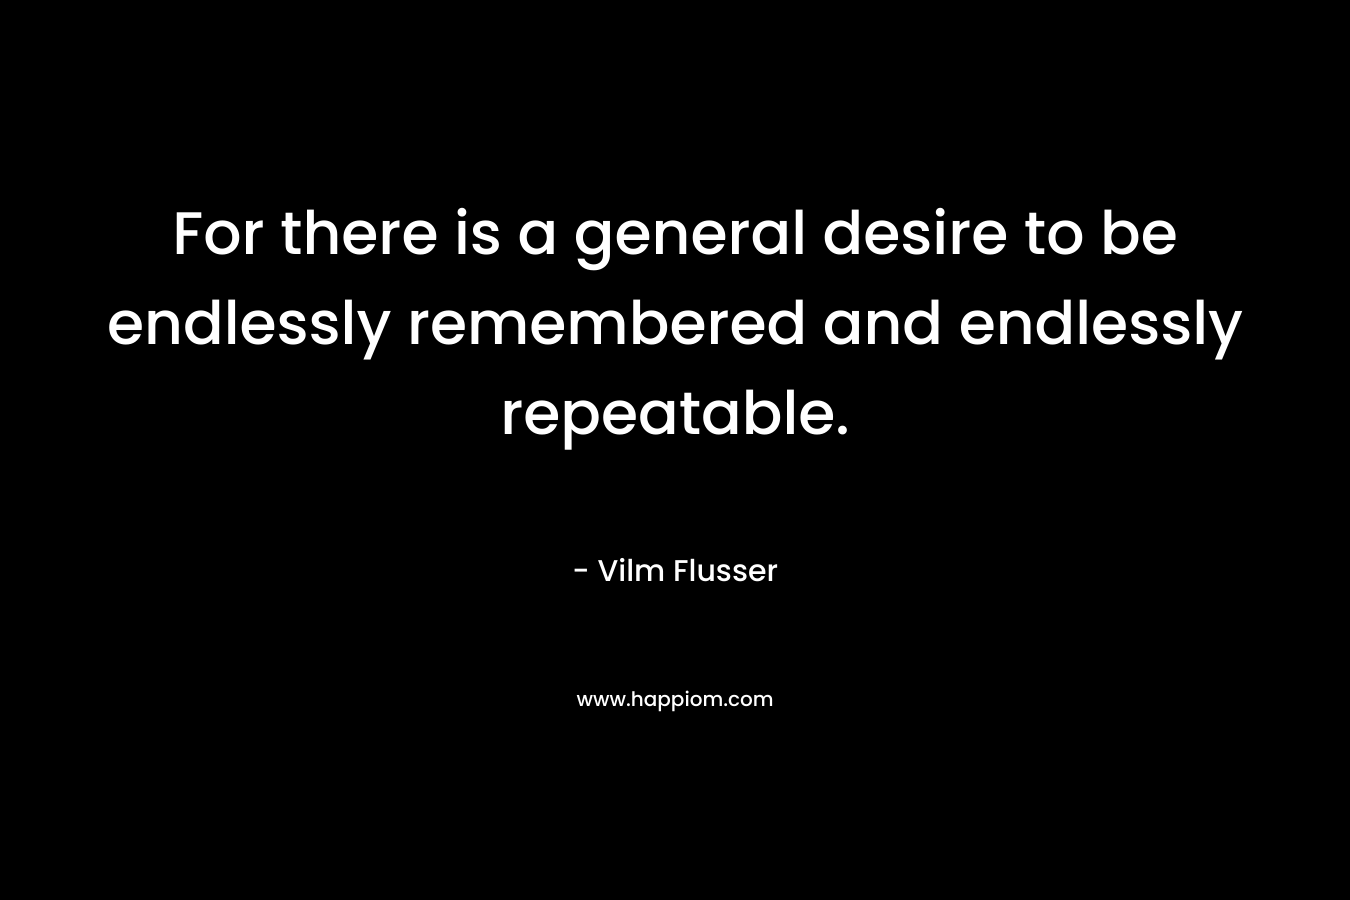 For there is a general desire to be endlessly remembered and endlessly repeatable.